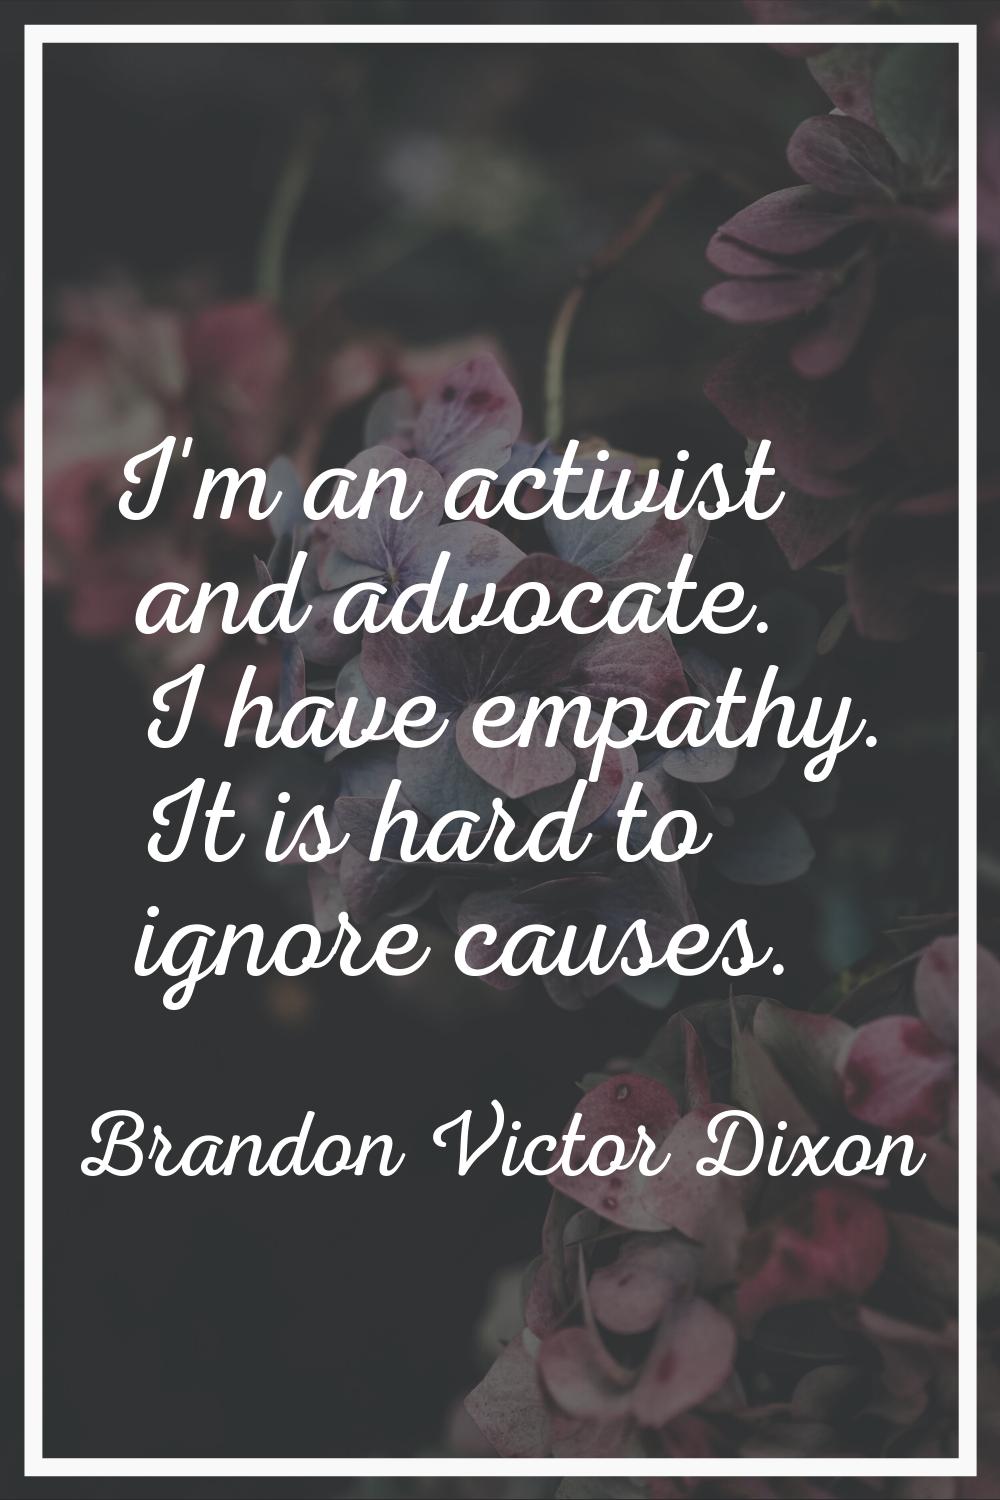 I'm an activist and advocate. I have empathy. It is hard to ignore causes.